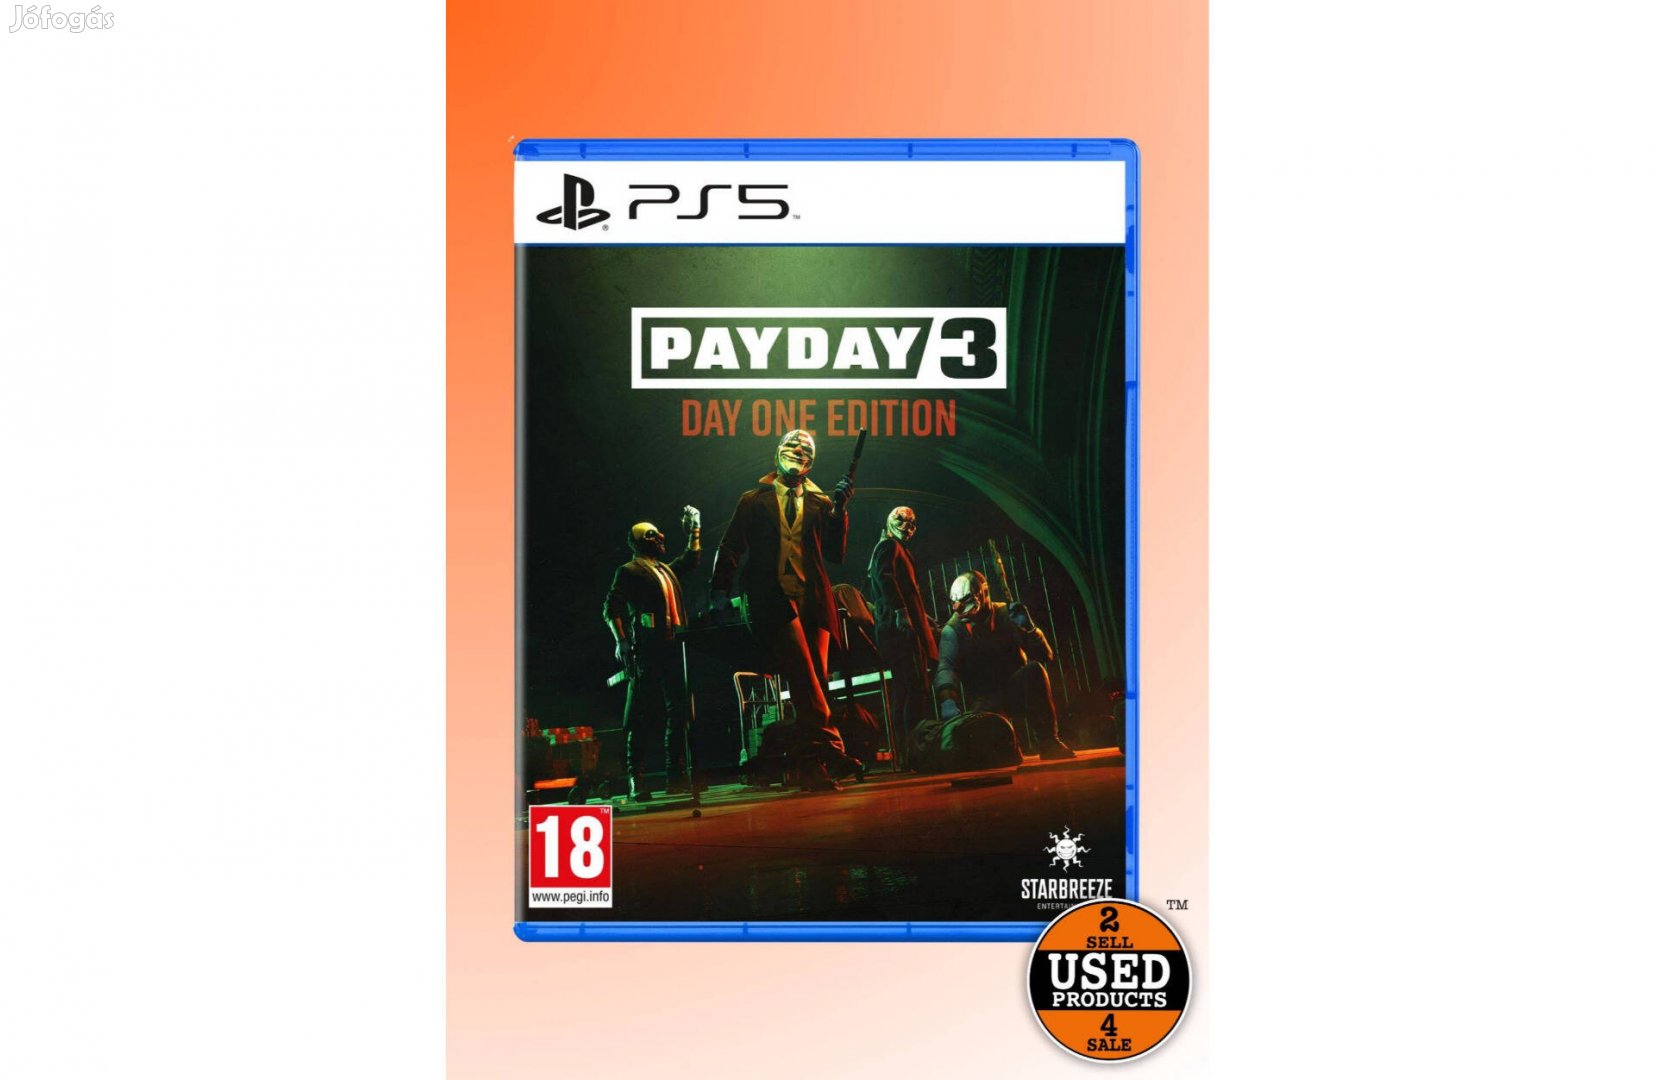 Payday 3: Day One Edition - PS5 | Used Products Budapest Blaha